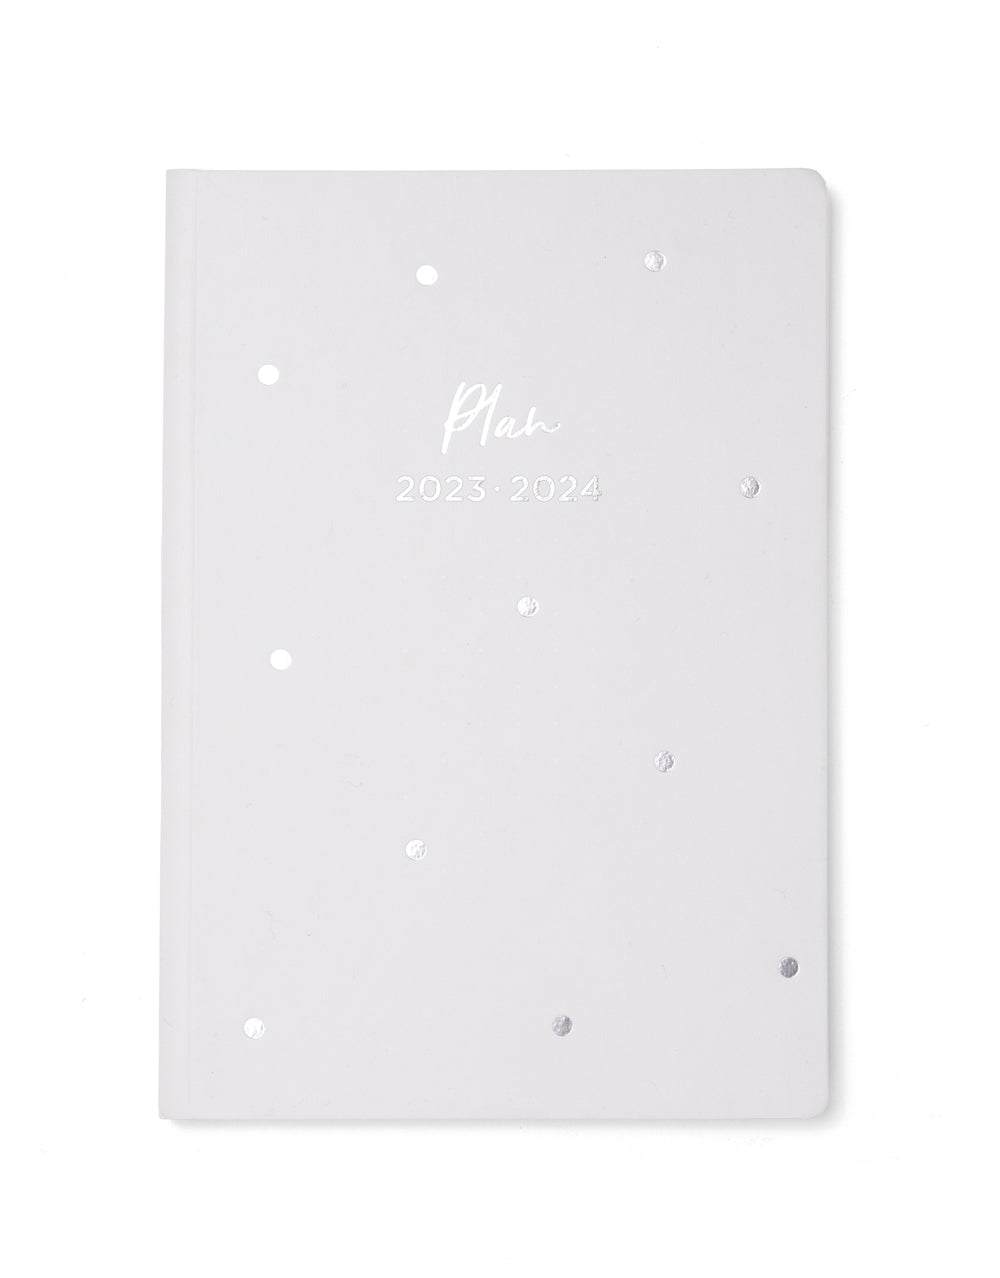 Dotted Planners in Shop by Design 